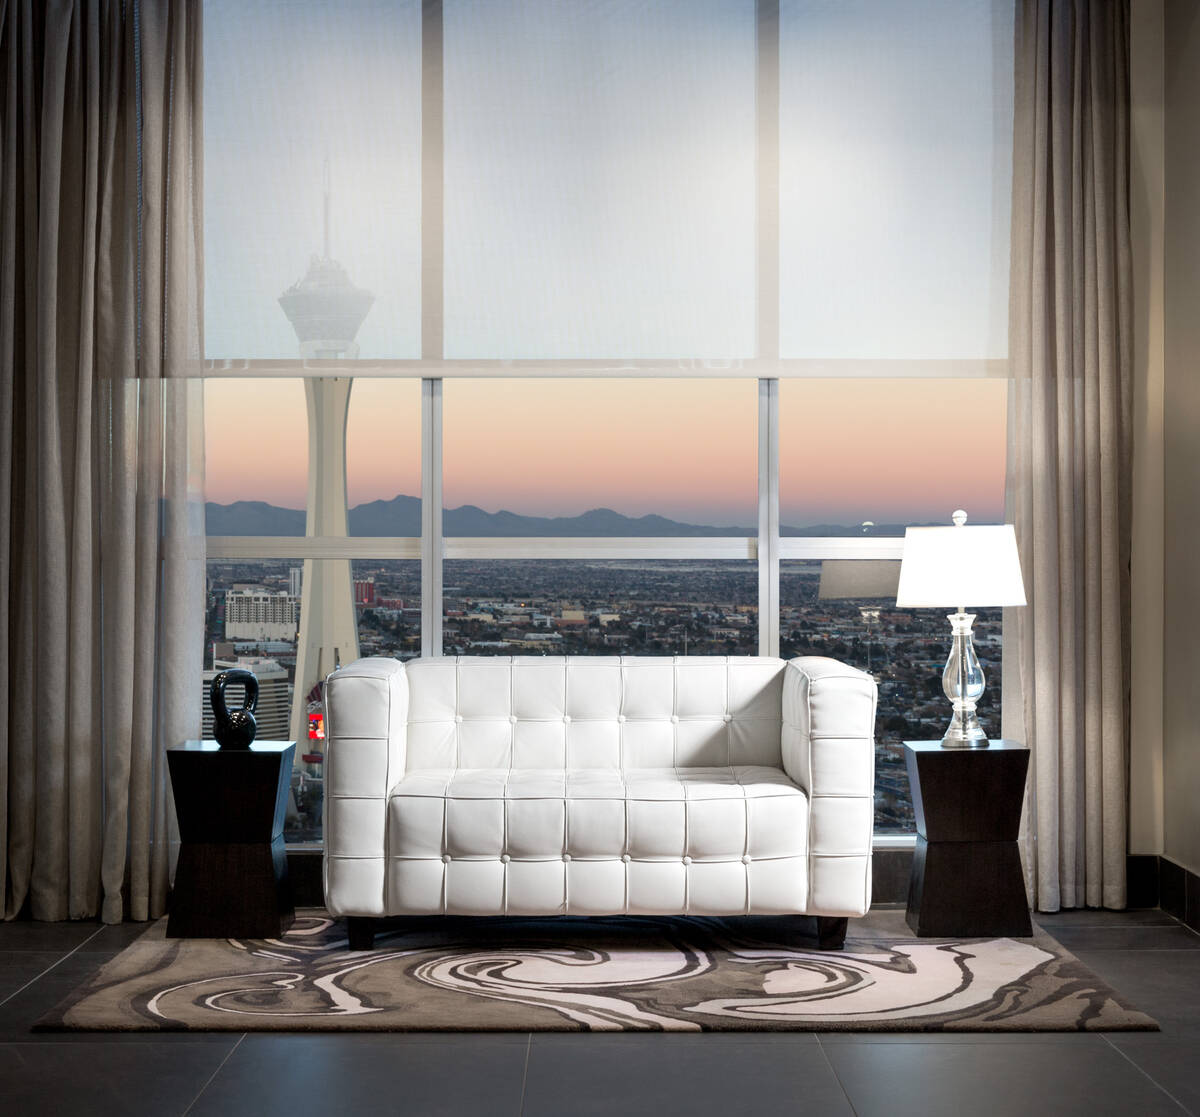 The large windows in high-rise condos are perfect custom motorized shades. (DropShade)